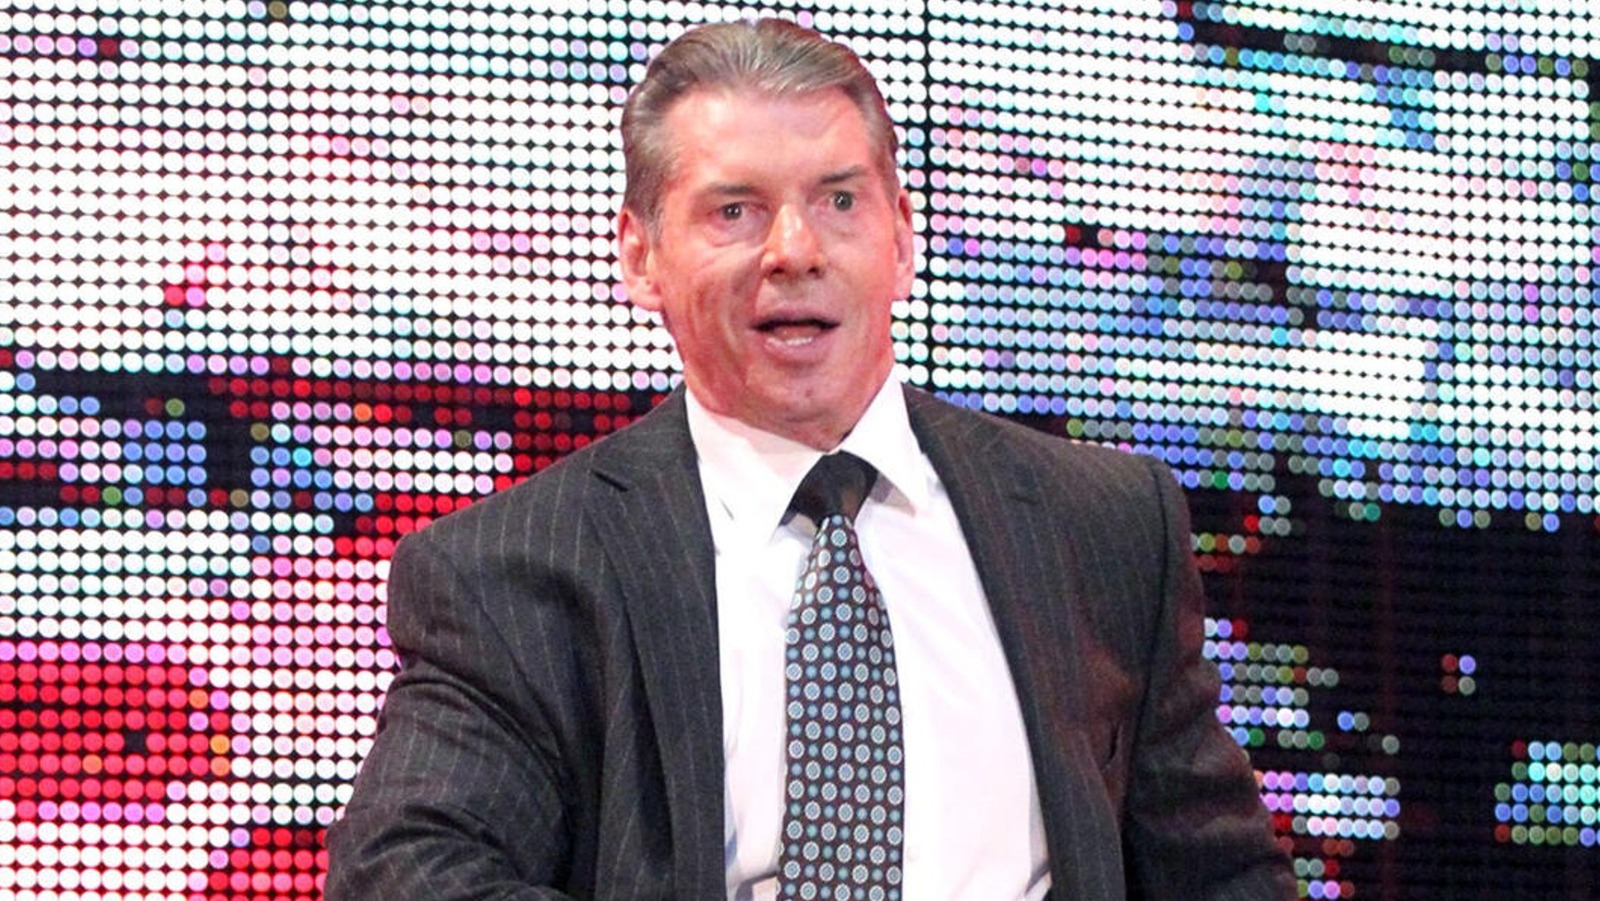 WWE Hall Of Famer Eric Bischoff Describes Vince McMahon As A 'Complicated Guy'